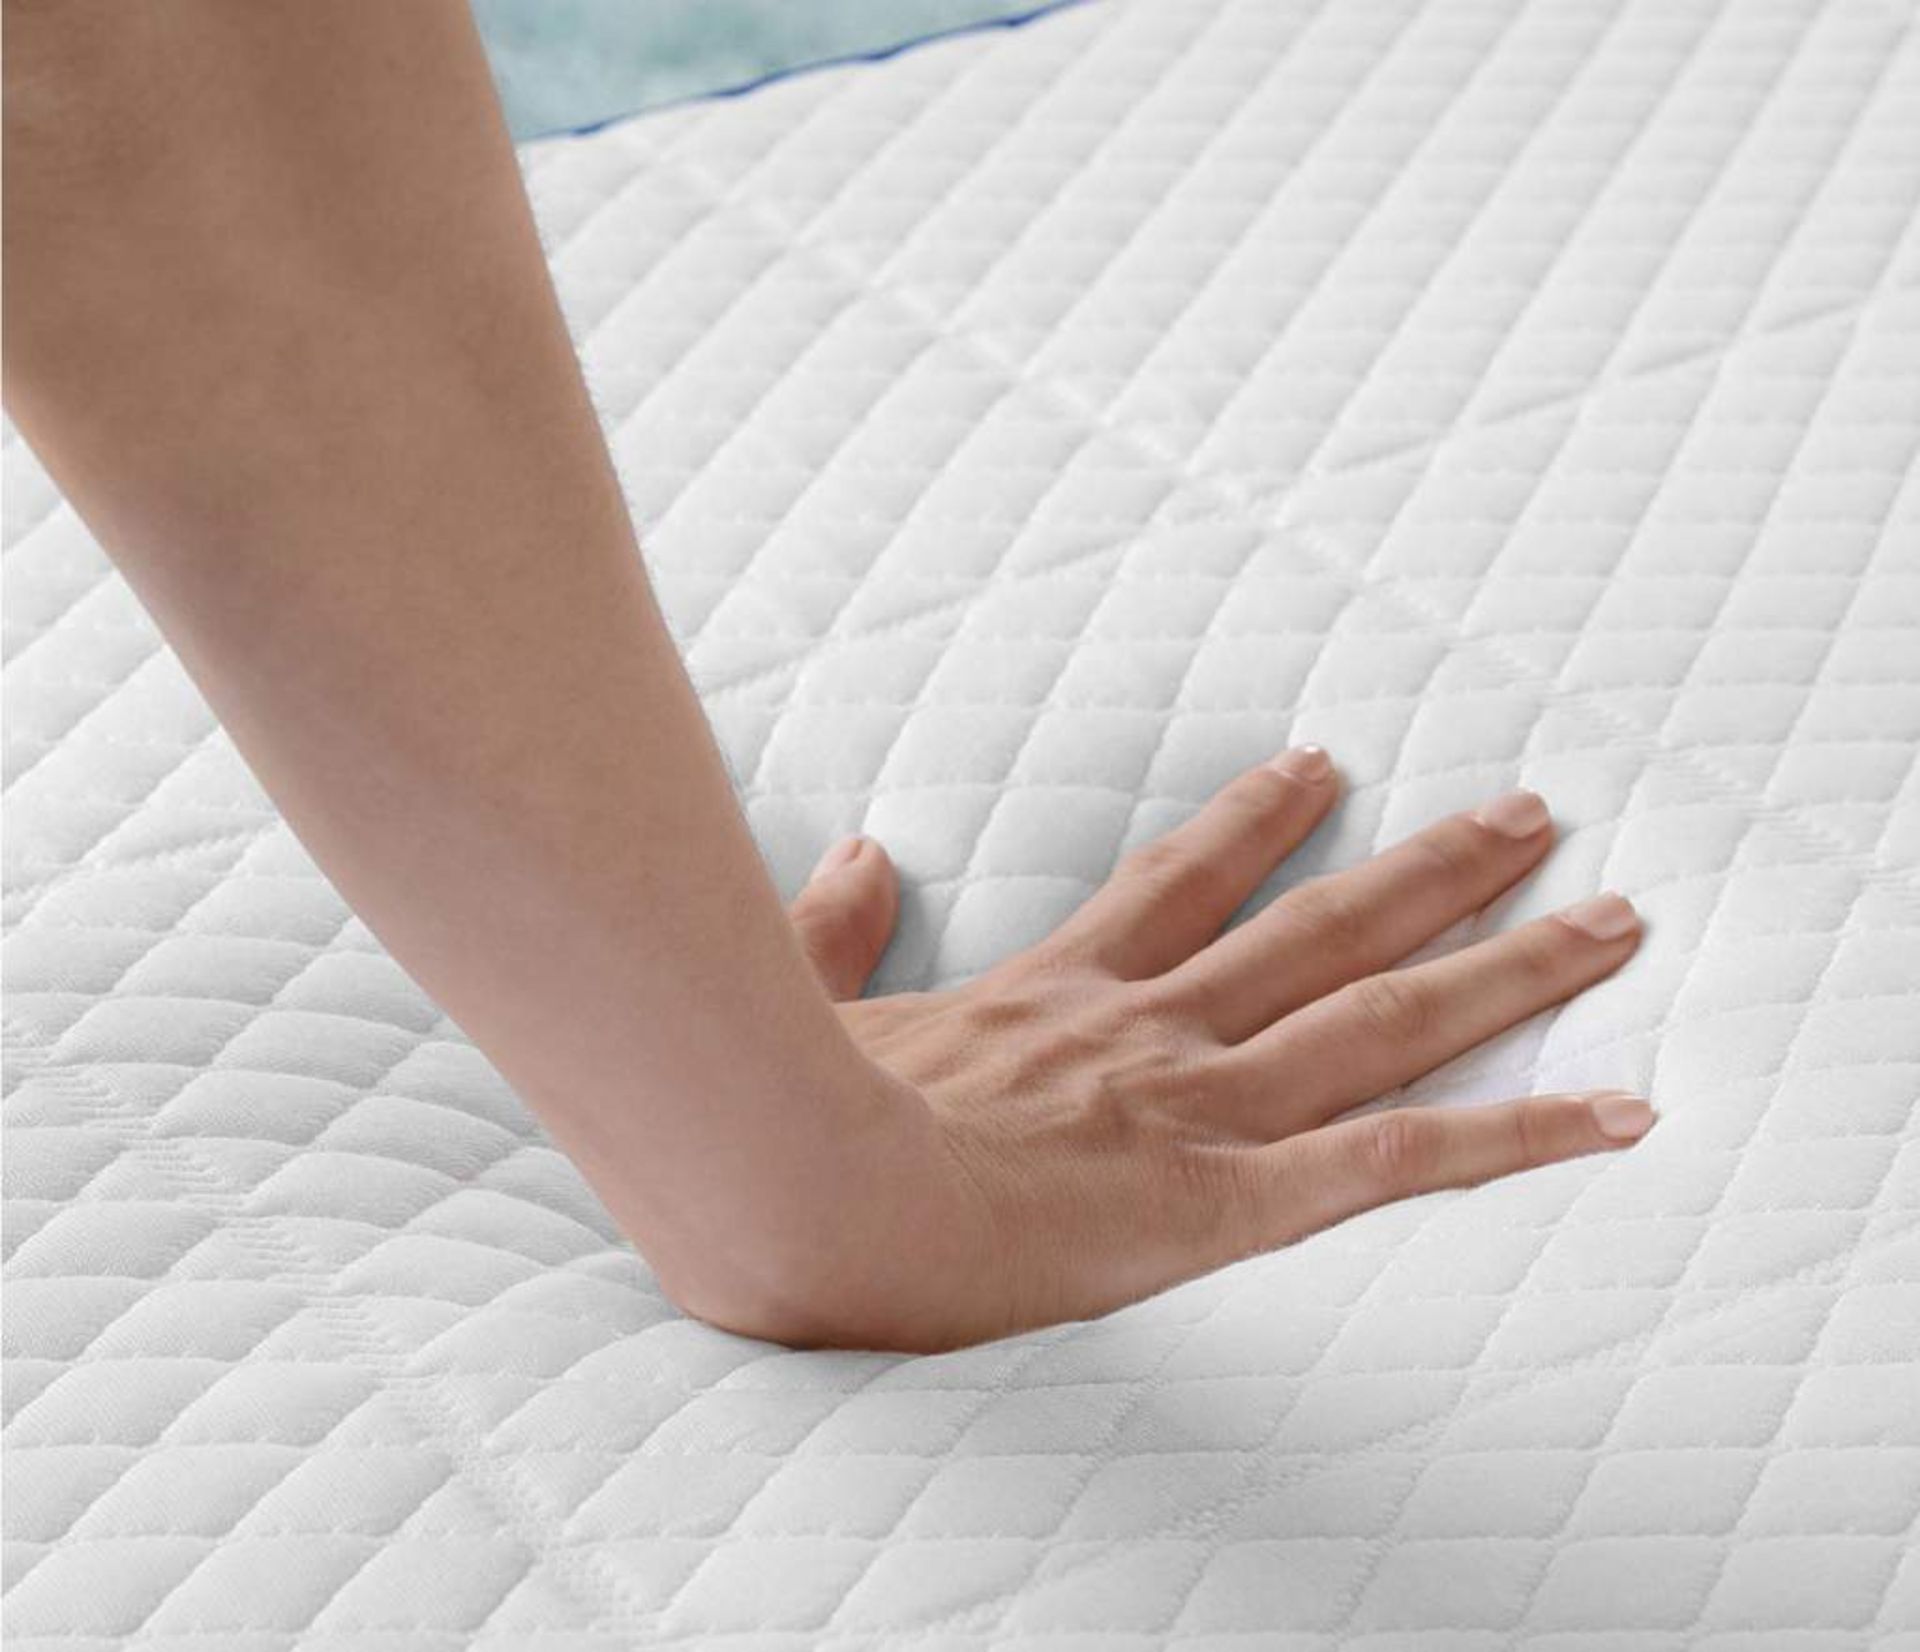 x1| 6ft Nectar Professionally Refurbished Smart Pressure Relieving Memory Foam Mattress|RRP £769| - Image 2 of 2